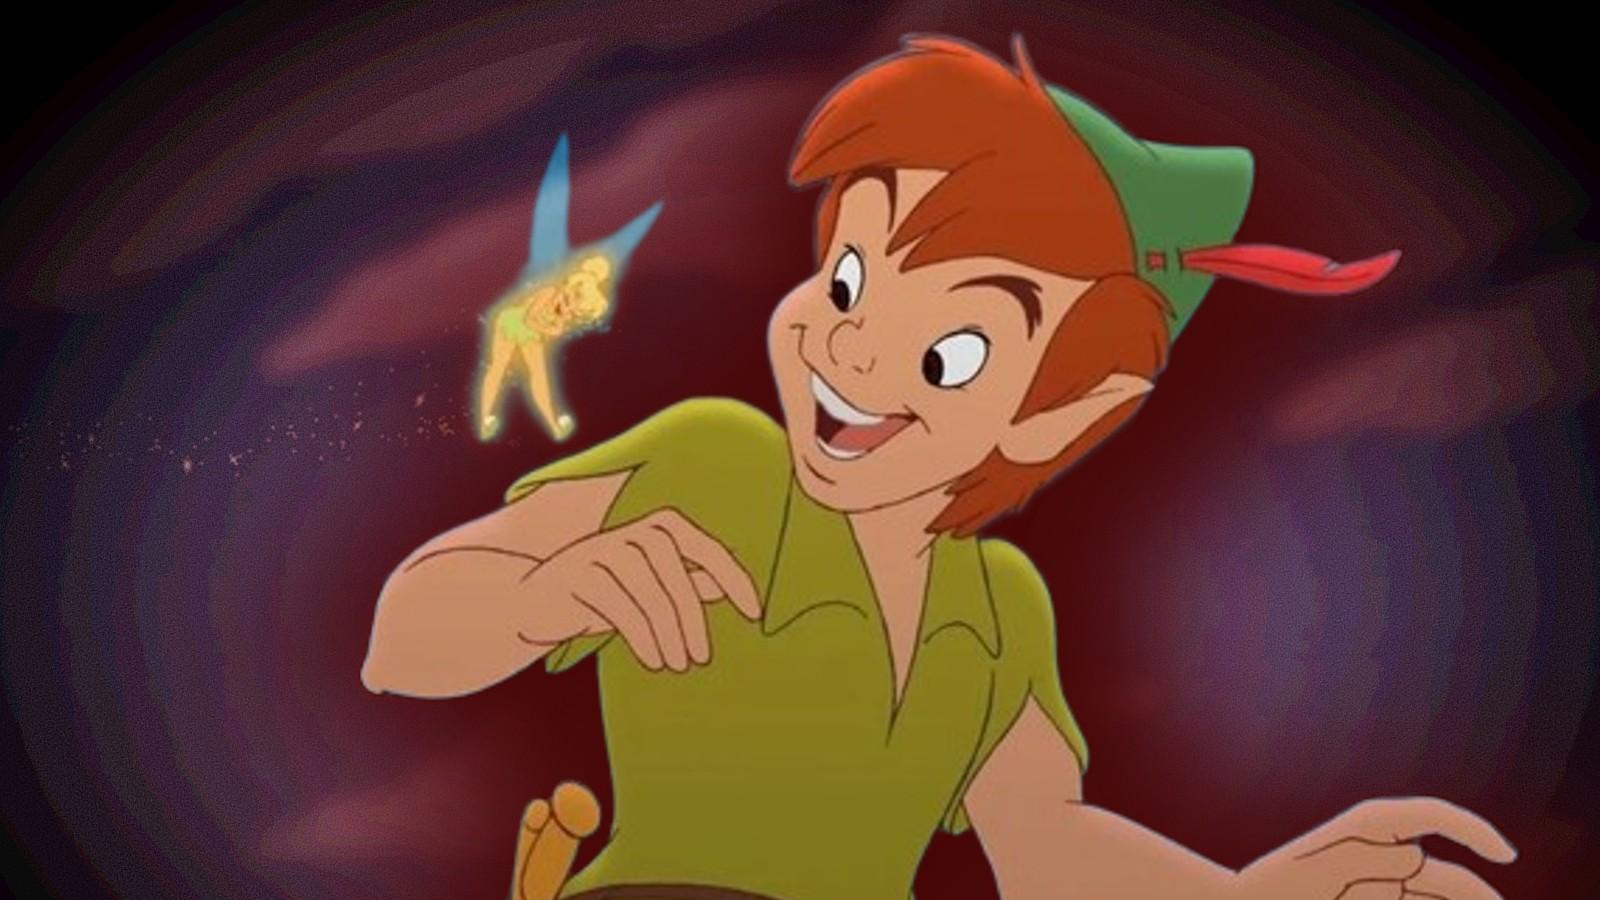 Peter Pan horror movie to feature “obese” drug addict Tinkerbell - Dexerto